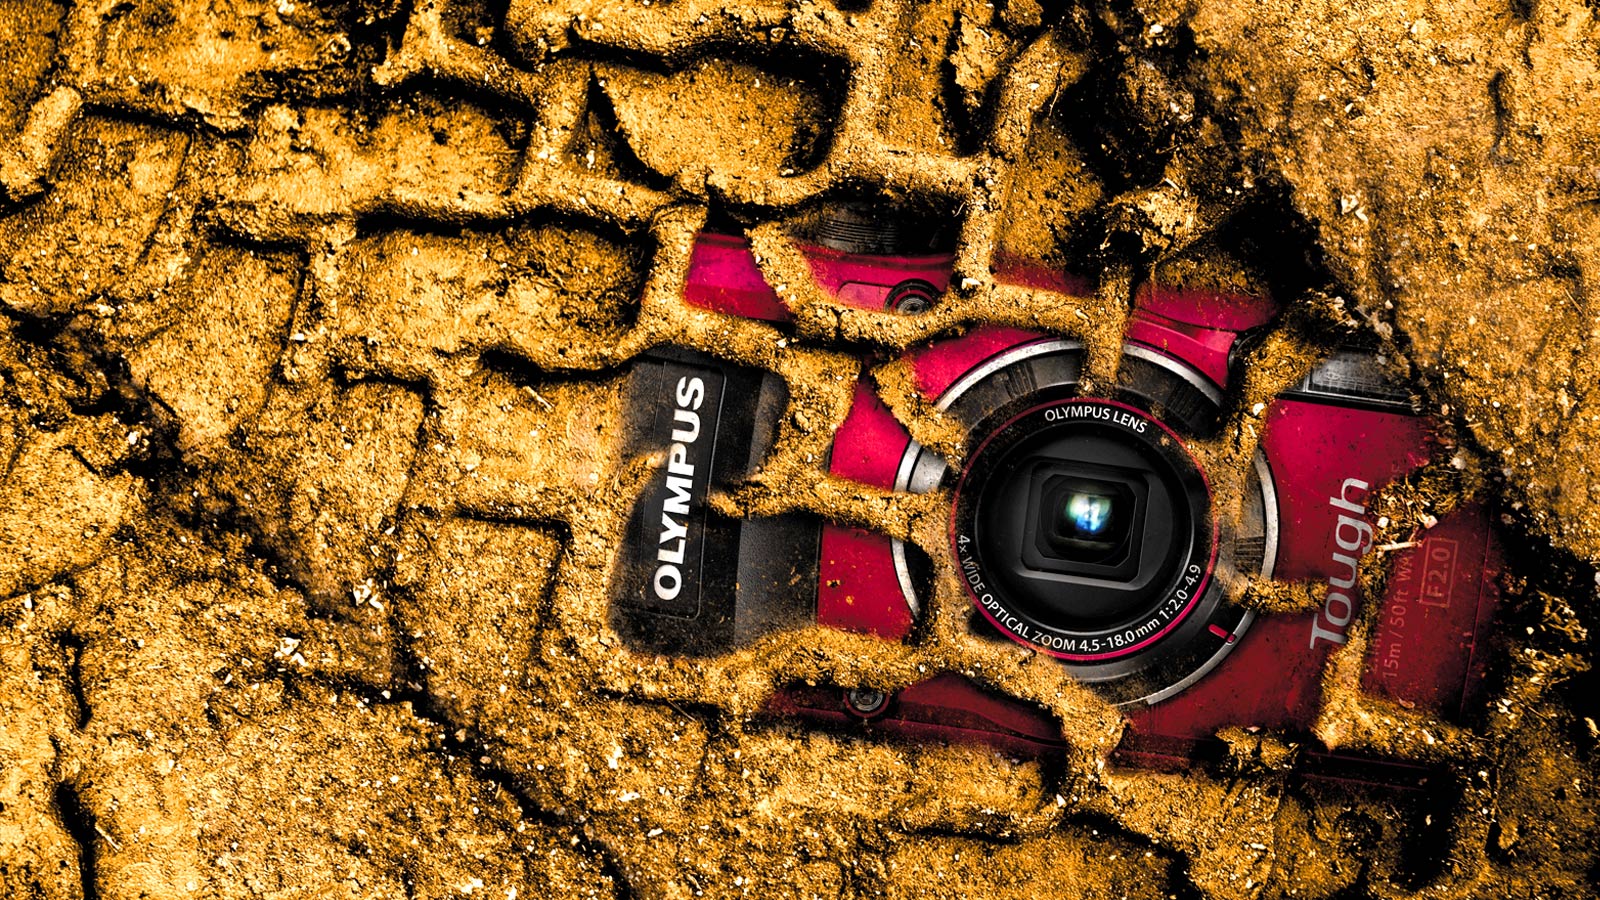 Gear Review: Olympus TG-4 Tough Point and Shoot - Adventure